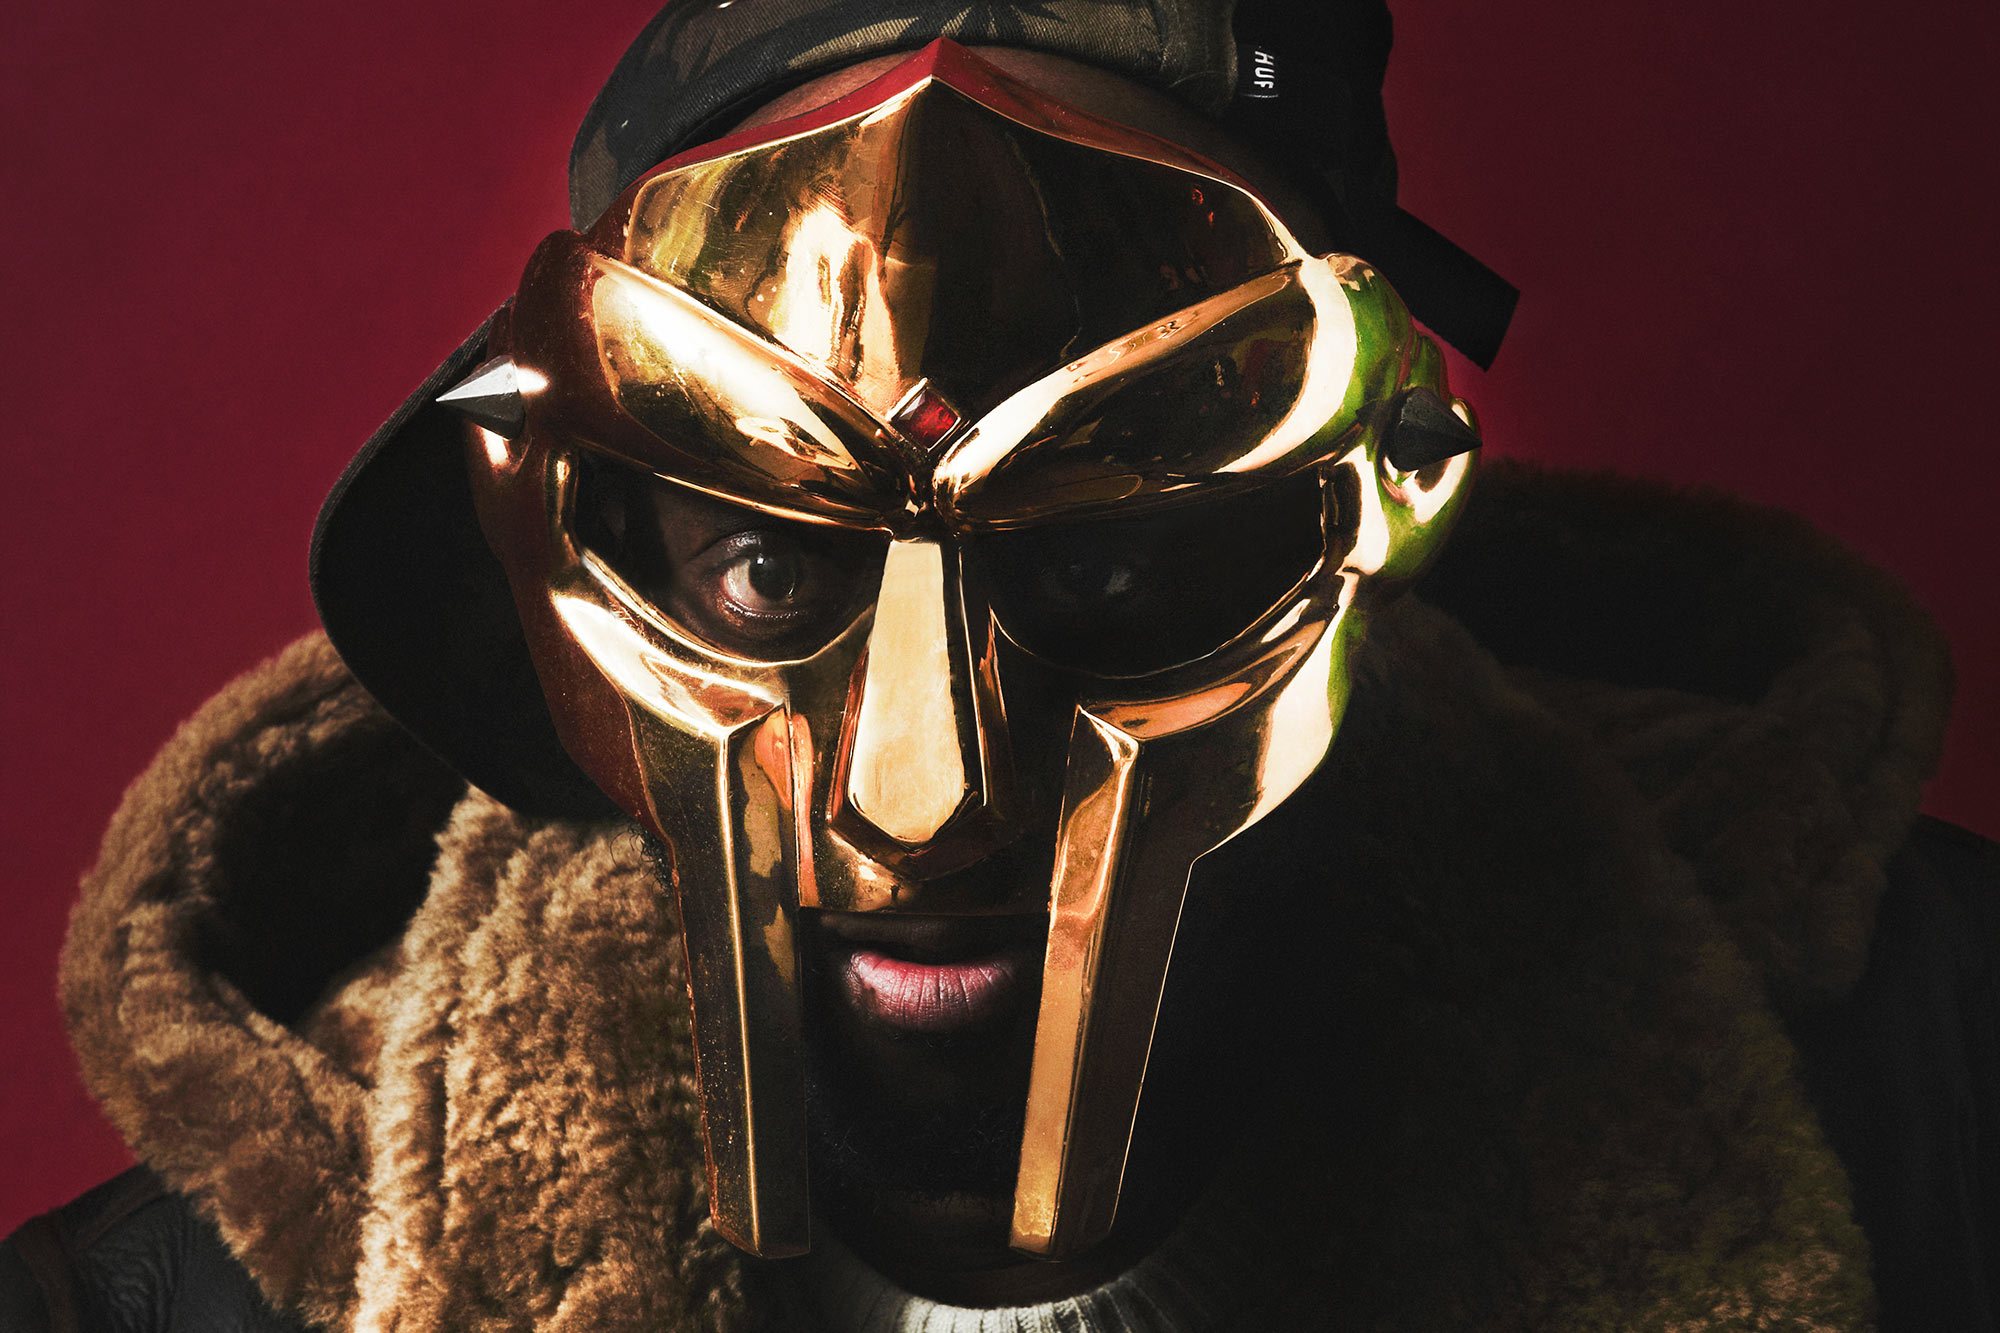 MF DOOM would\ve turned 50 today. Happy birthday and rest well king. 